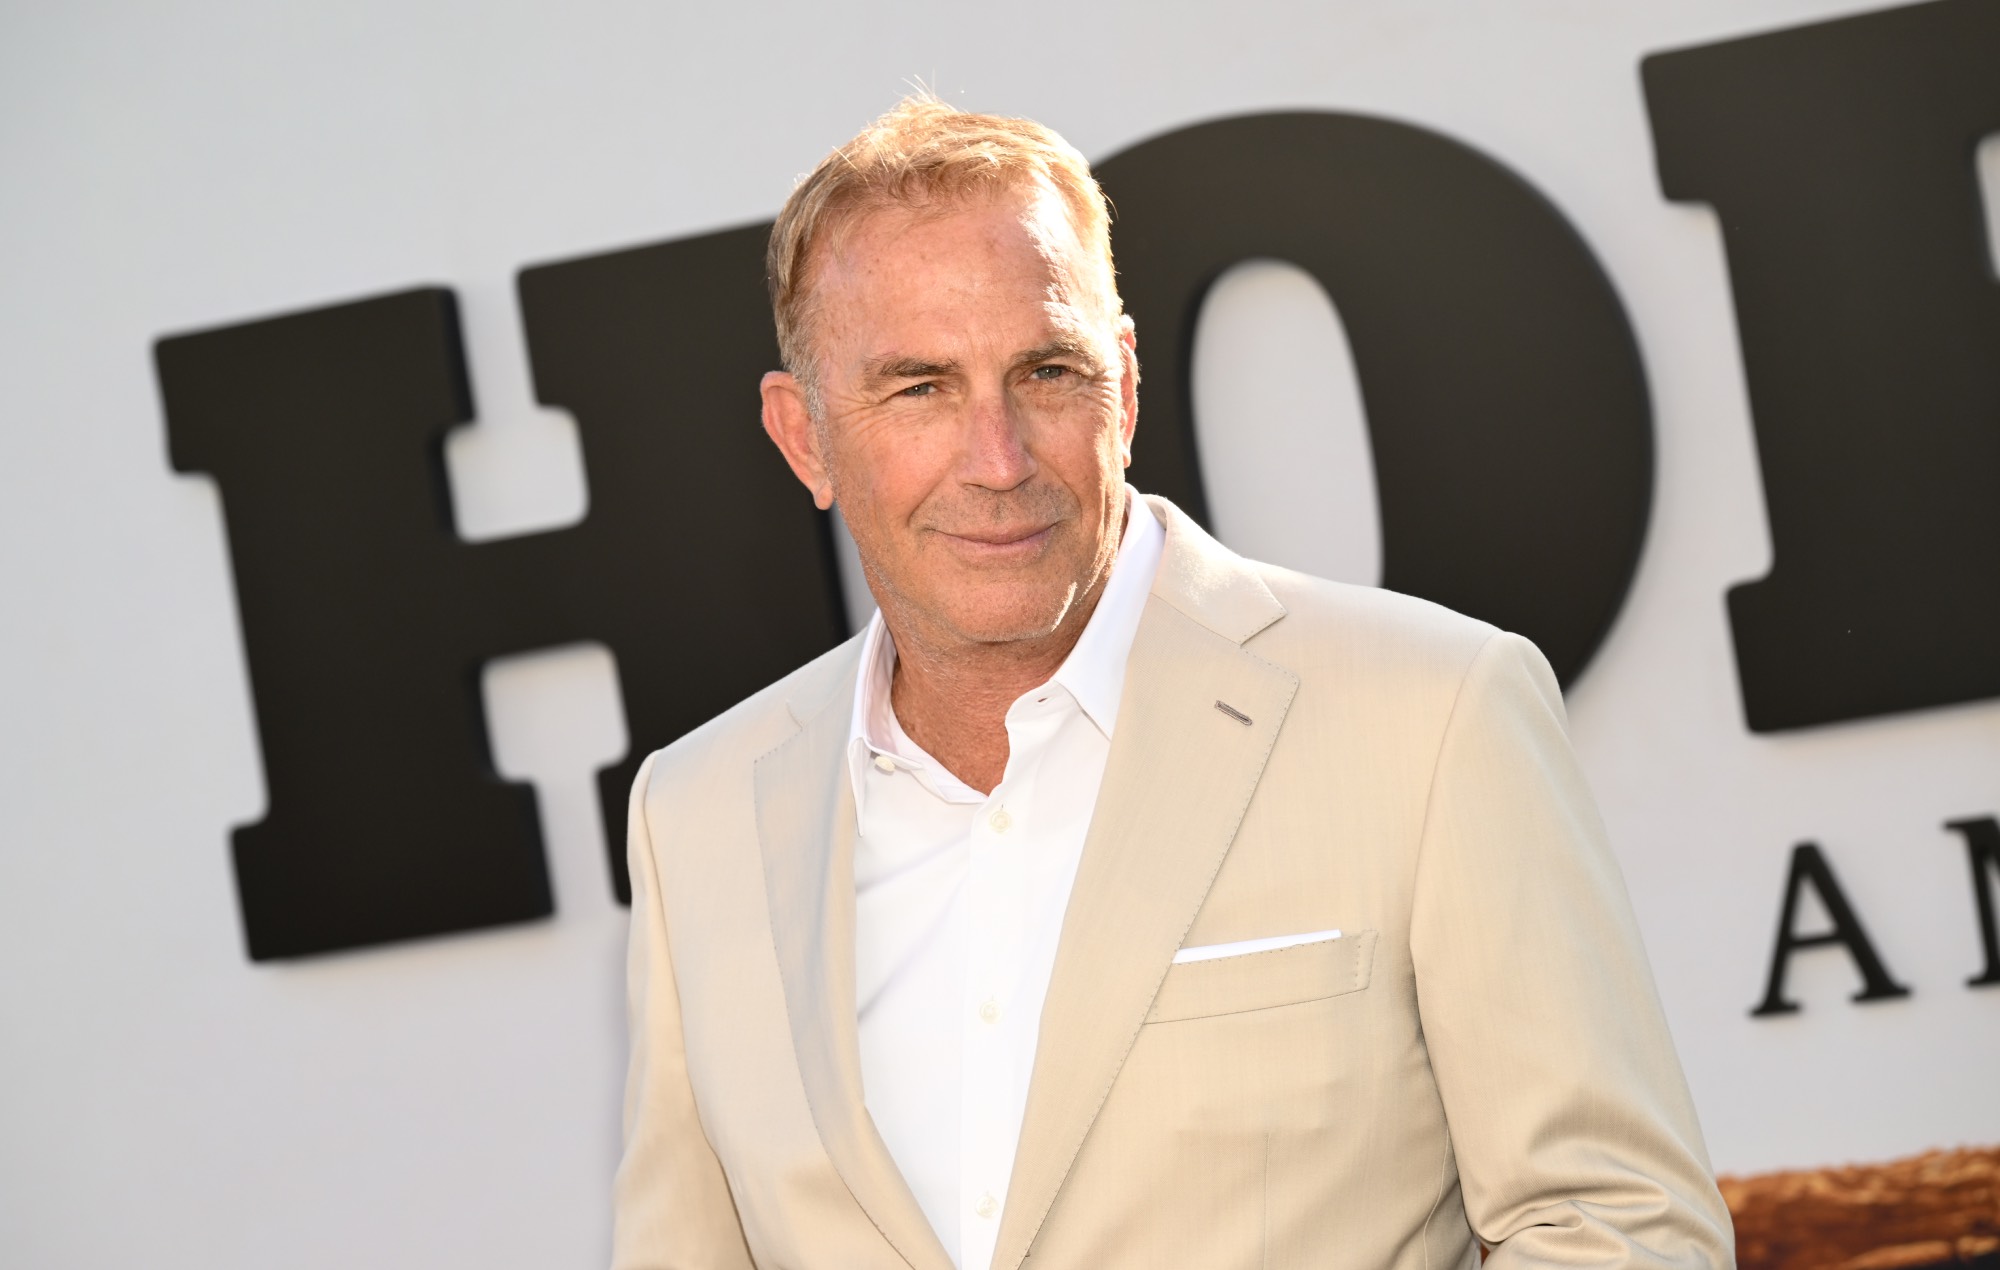 Kevin Costner’s self-financed Western ‘Horizon’ has bombed at the box office